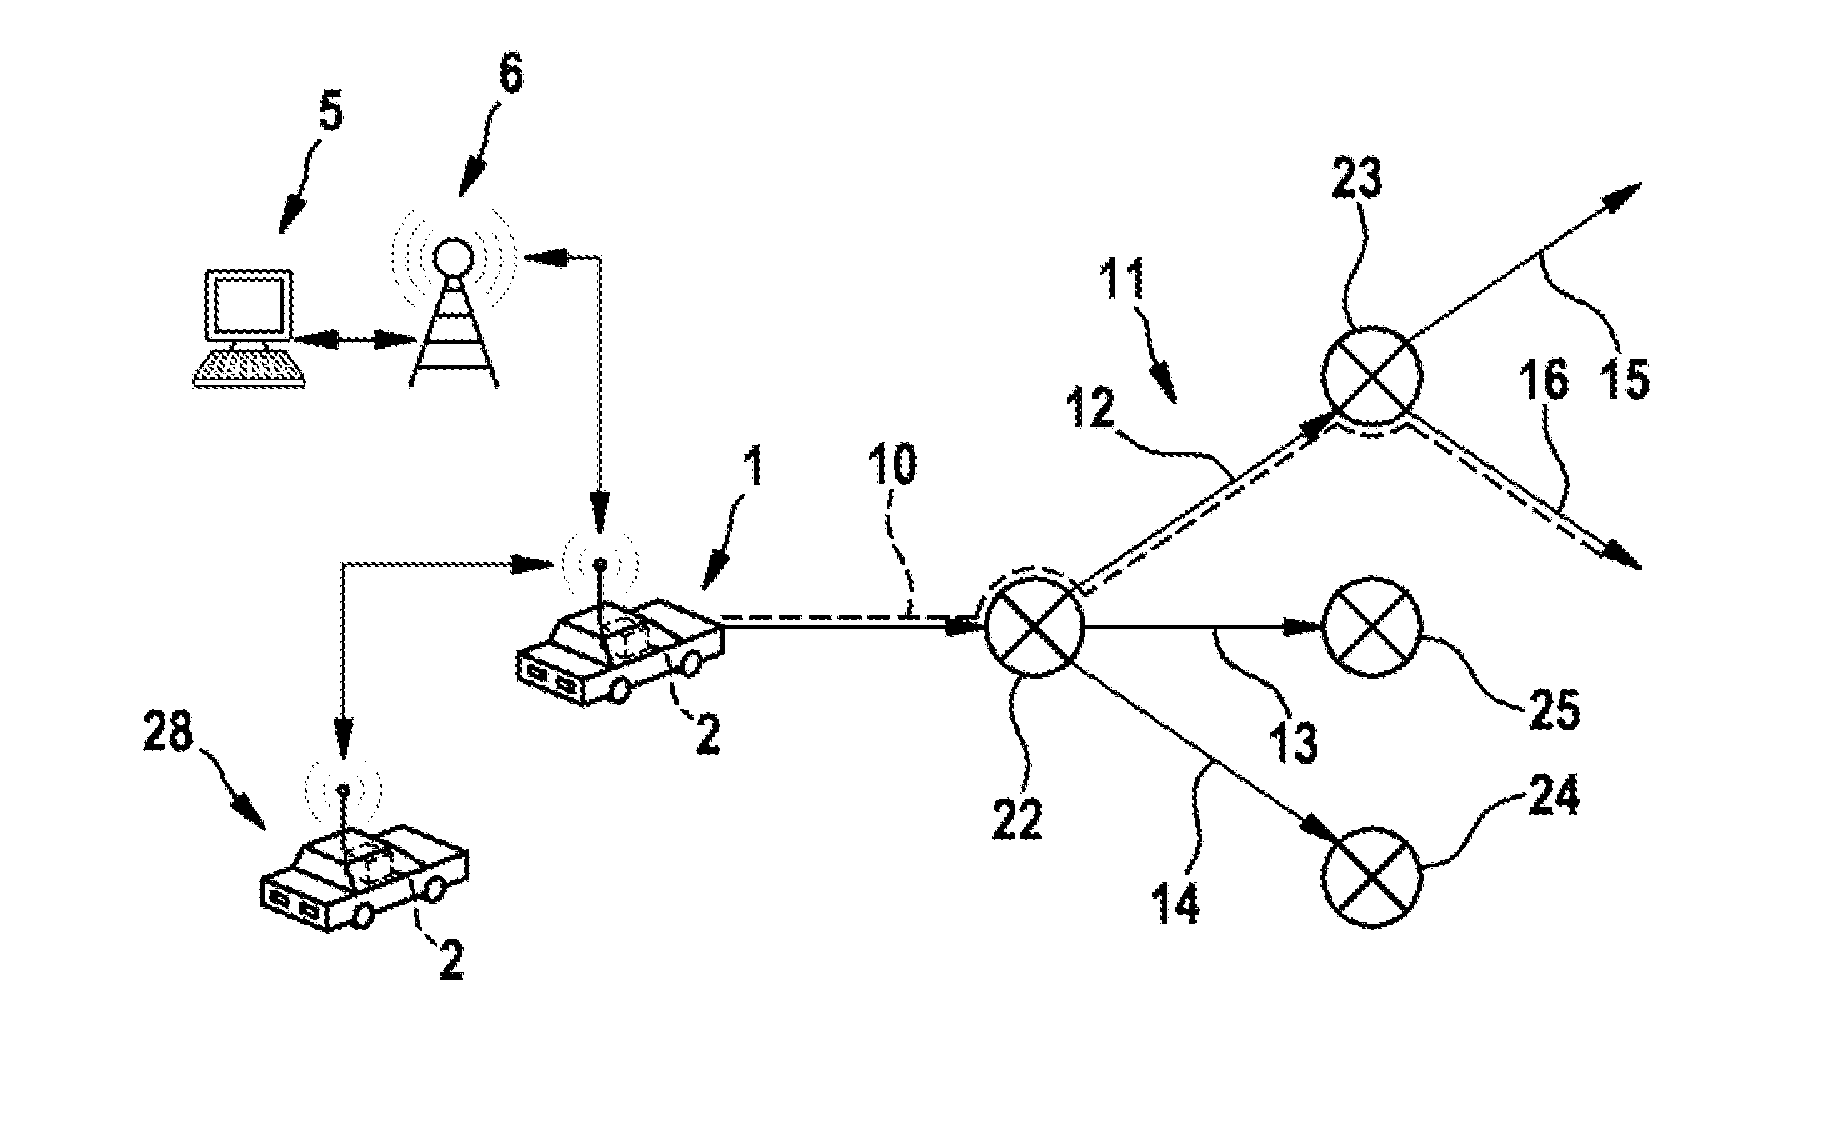 Method for transmitting route data for traffic telematics